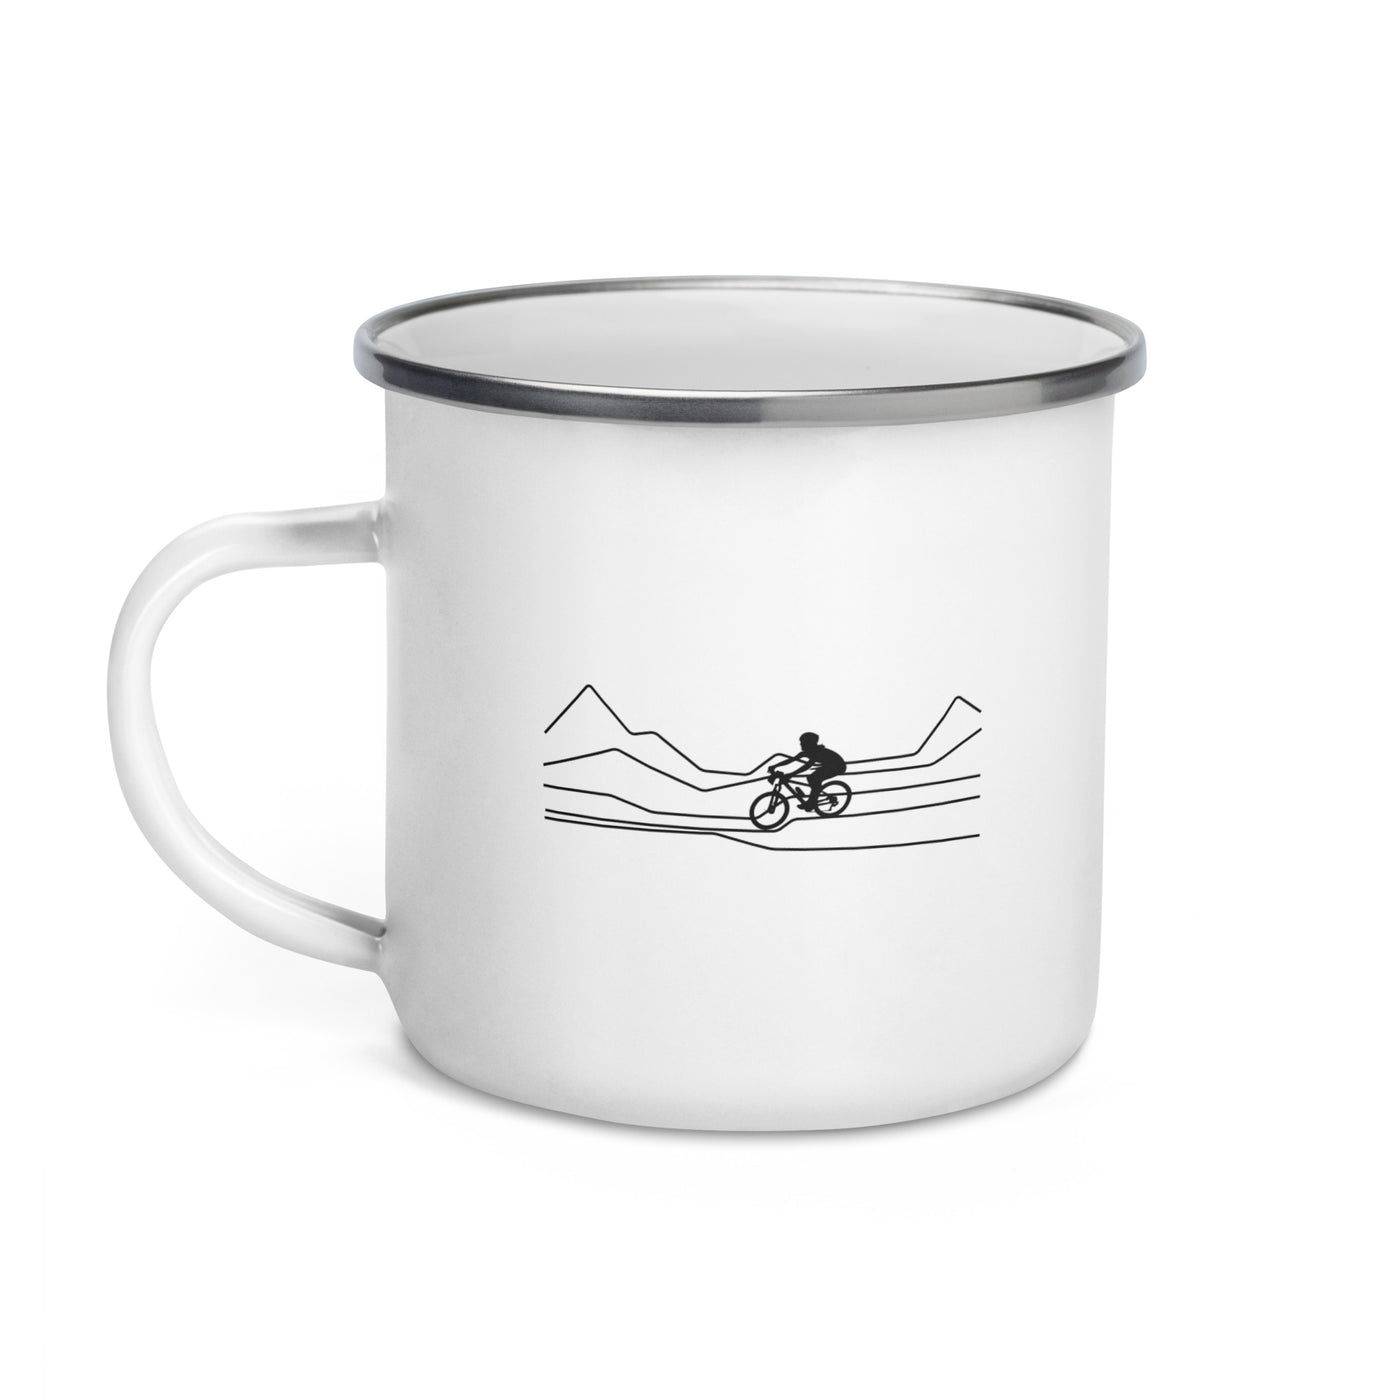 Cycle - Emaille Tasse fahrrad